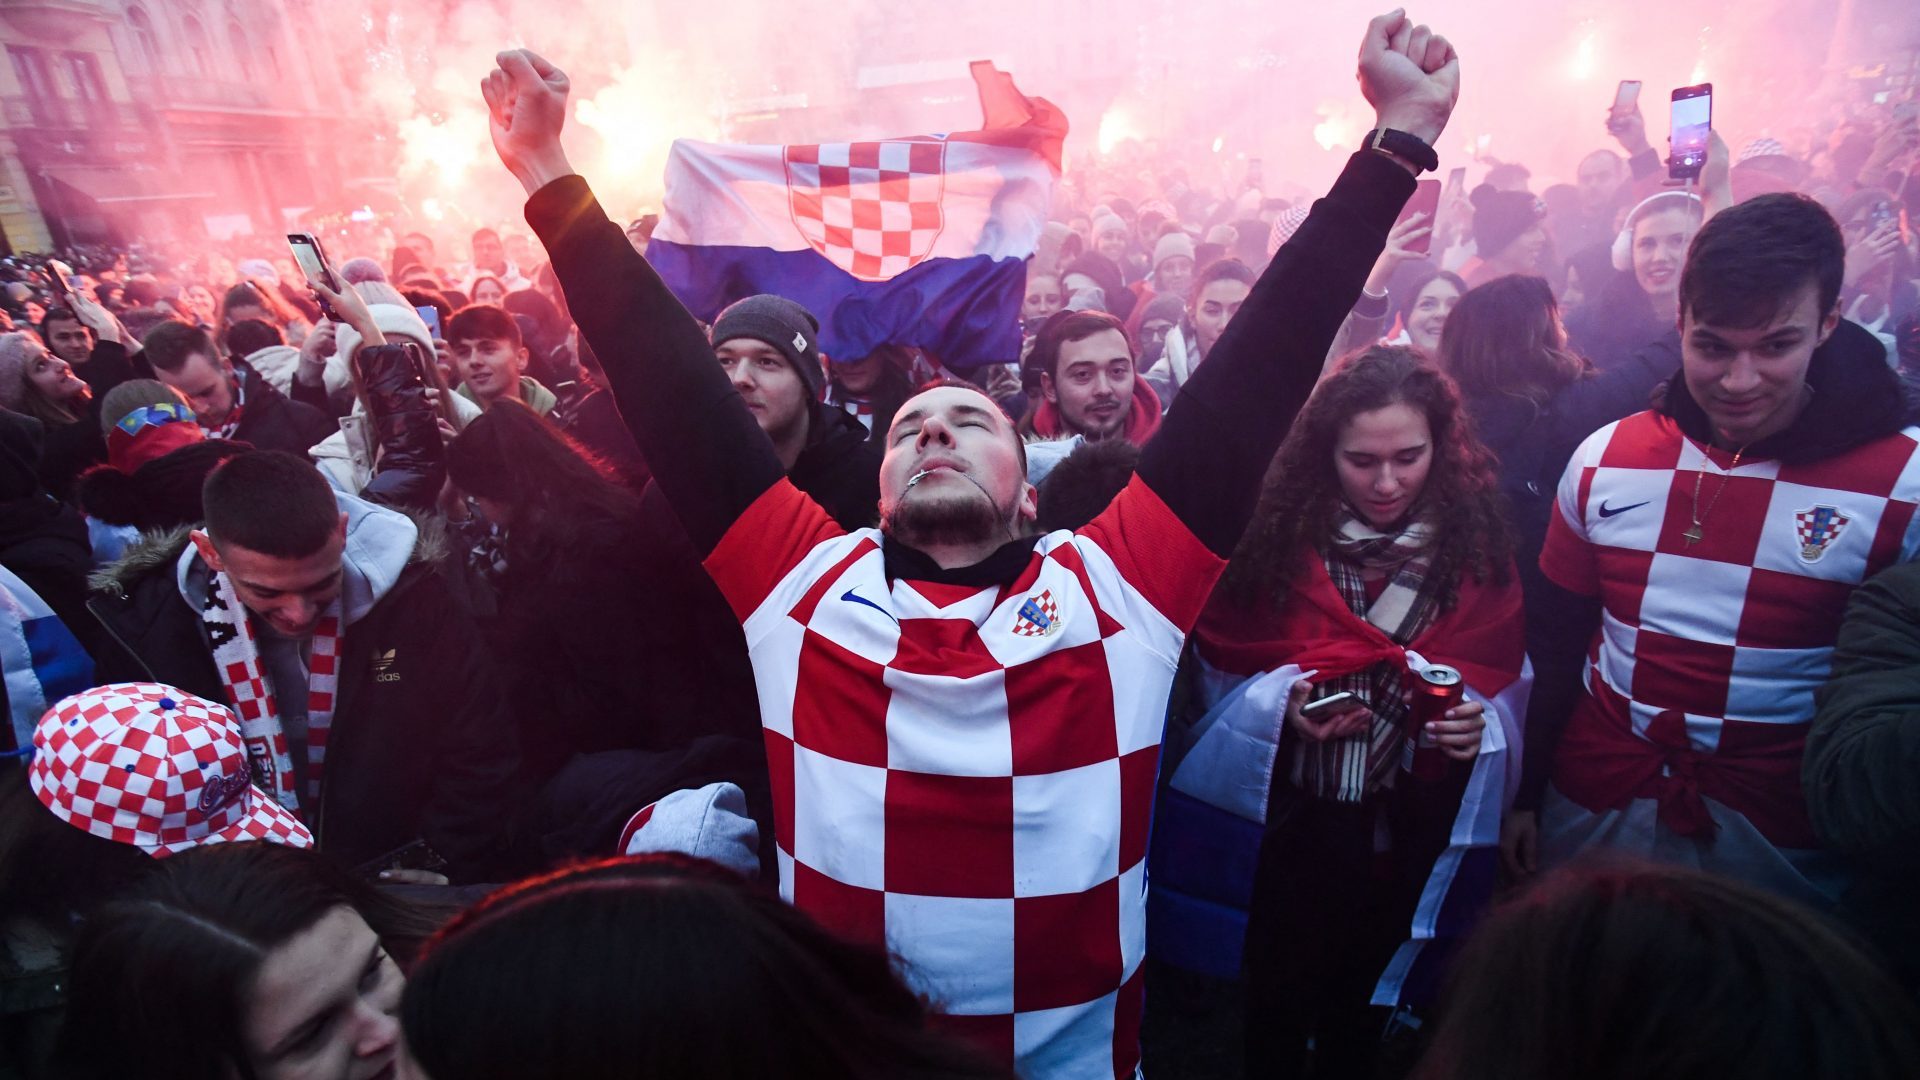 Fans celebrate as Croatia scores against Morocco in the 2022 World Cup. Photo: Denis Lovrovič/Getty